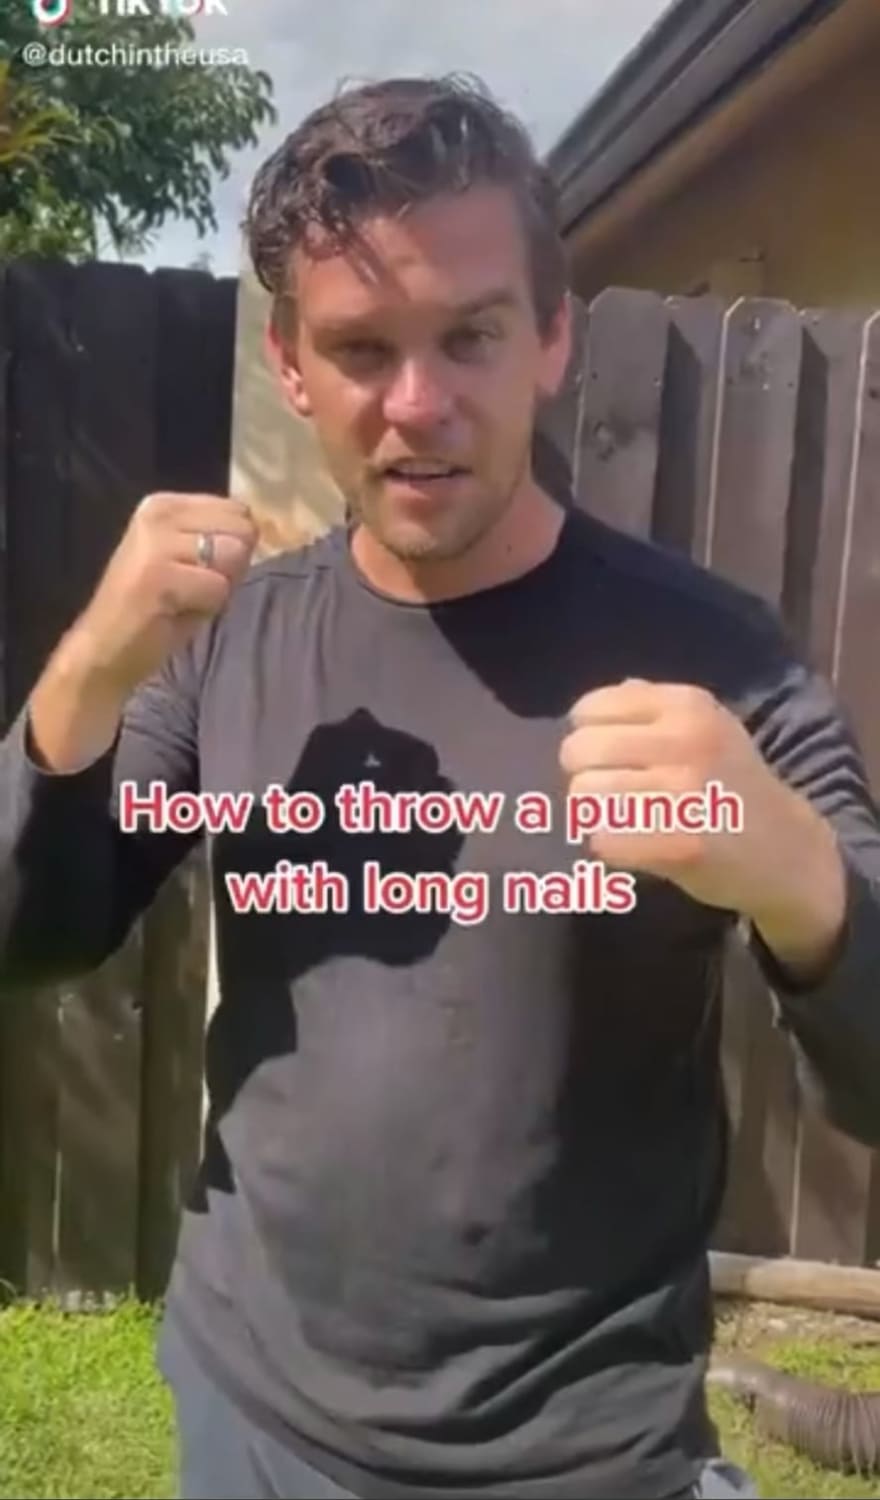 Self defense instructor gets full set of acrylic nails to teach people how to defend themselves with long nails